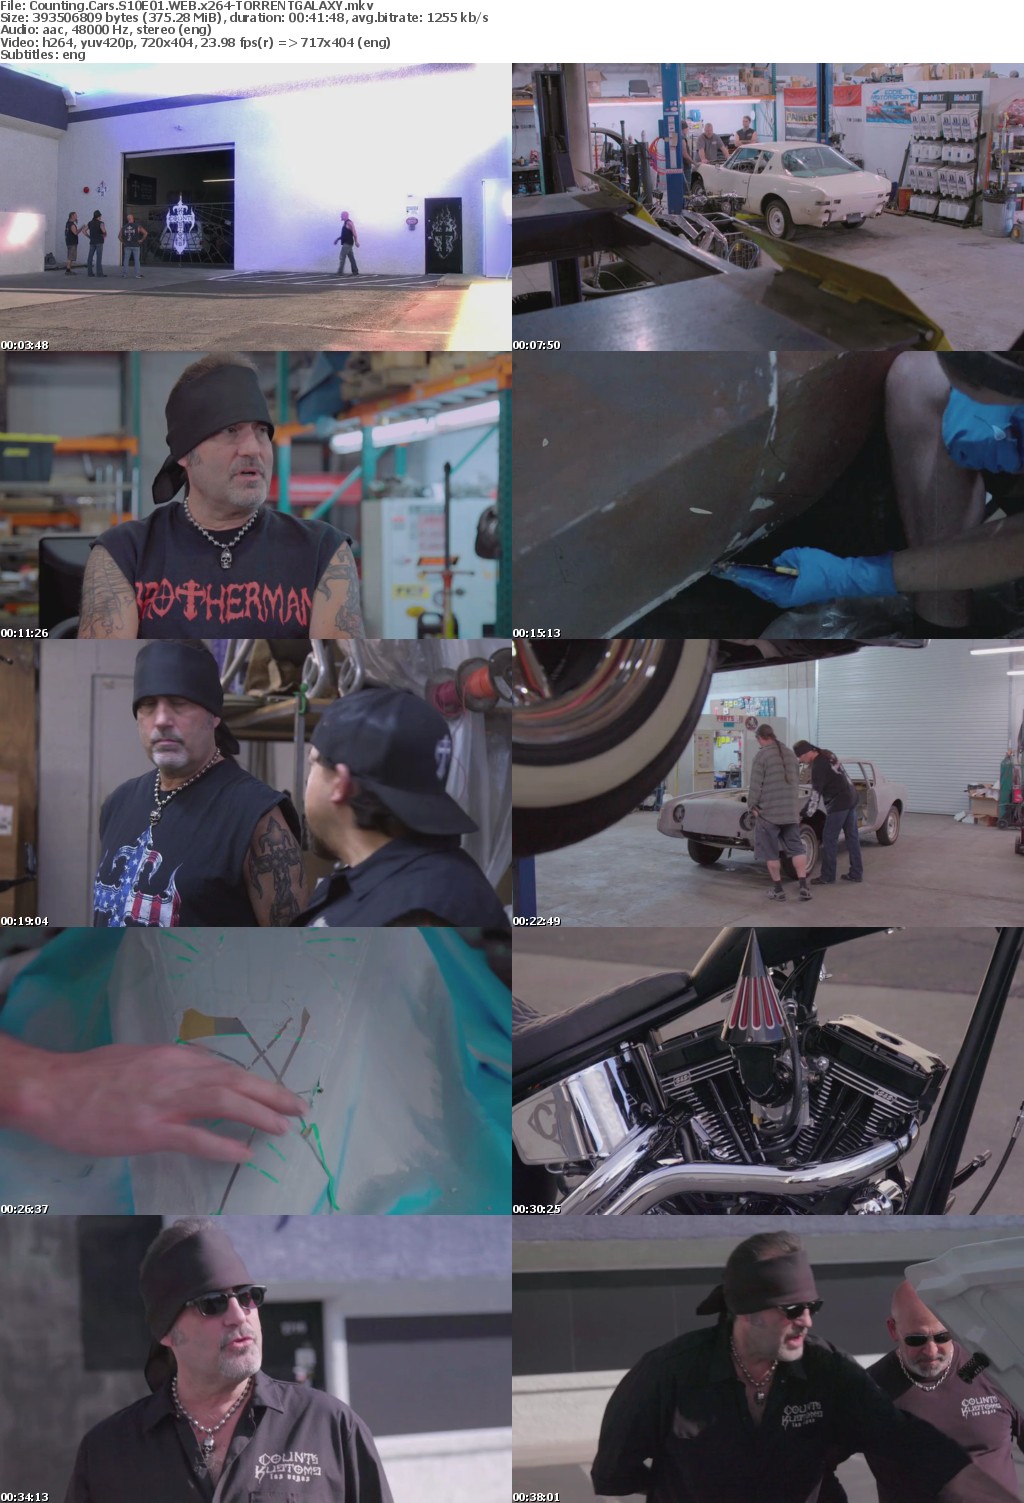 Counting Cars S10E01 WEB x264-GALAXY